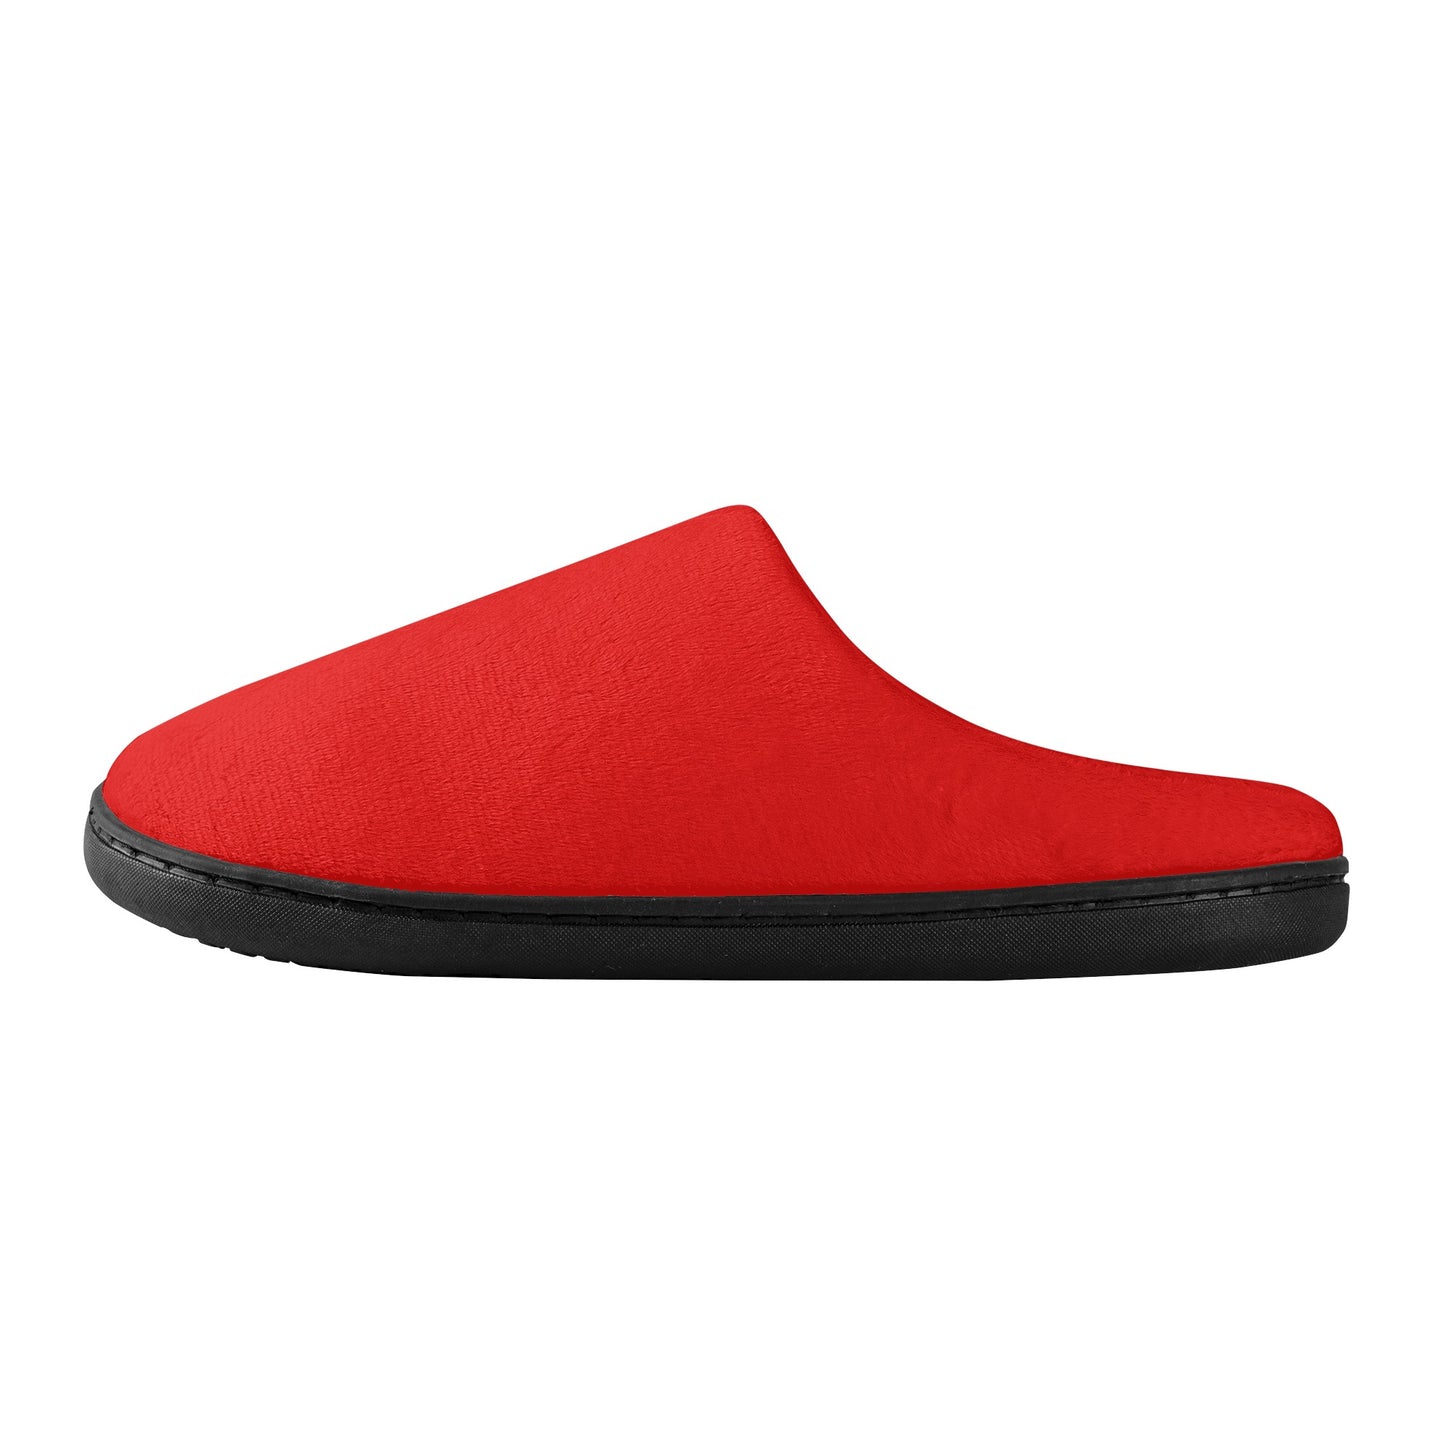 T4x Red Unisex Rubber Slippers